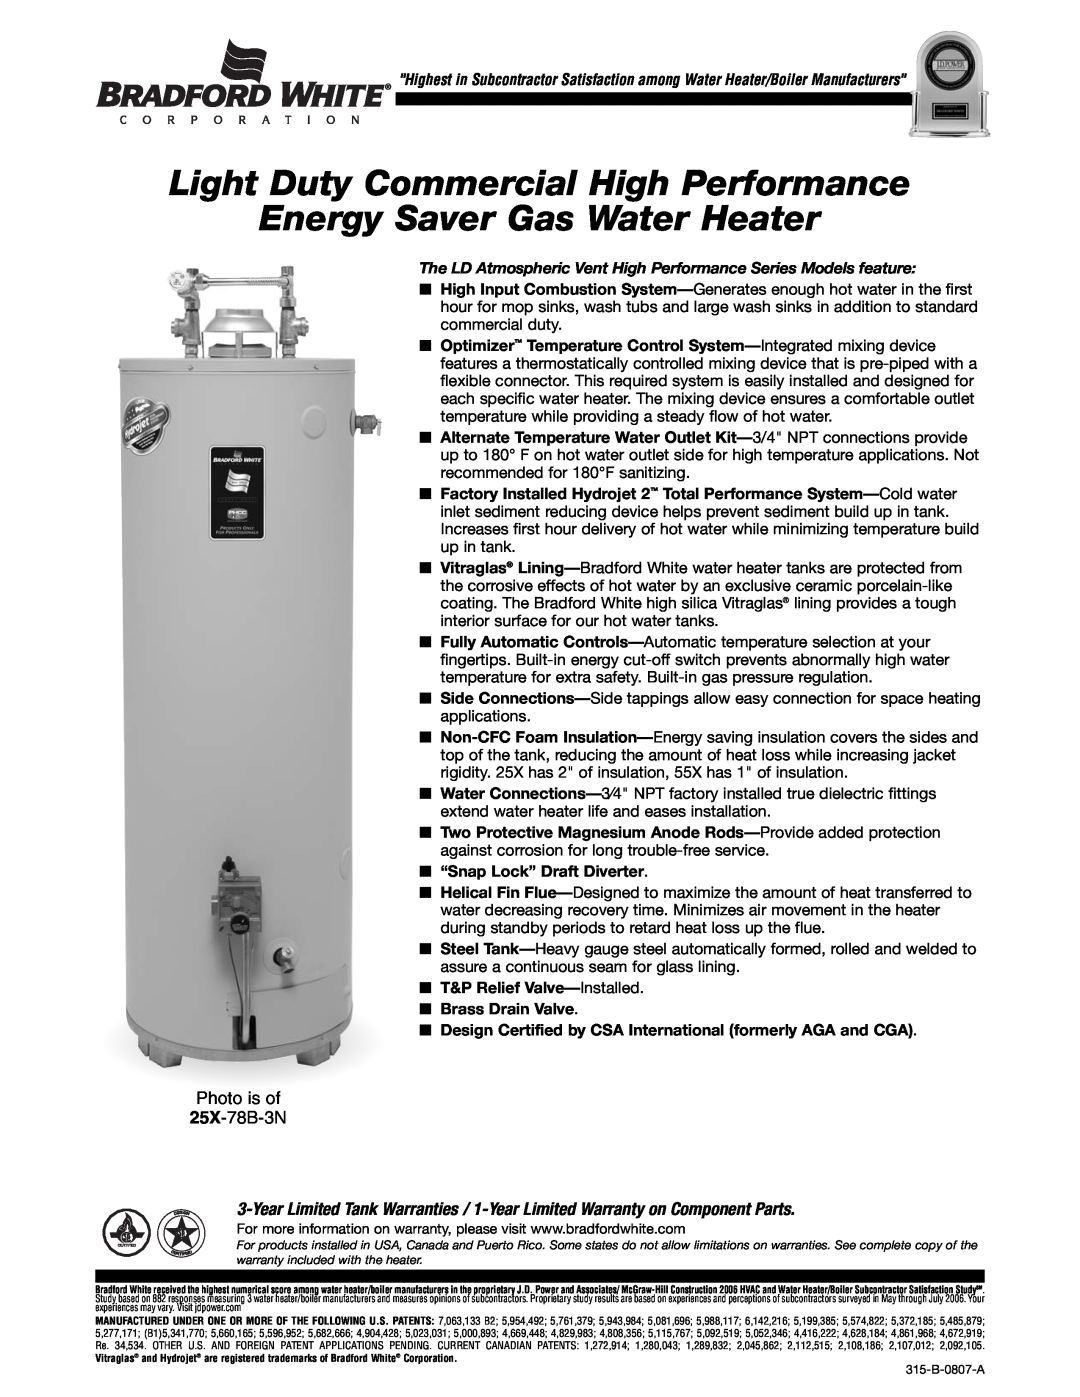 Bradford-White Corp 25X-78B-3N warranty Light Duty Commercial High Performance Energy Saver Gas Water Heater 